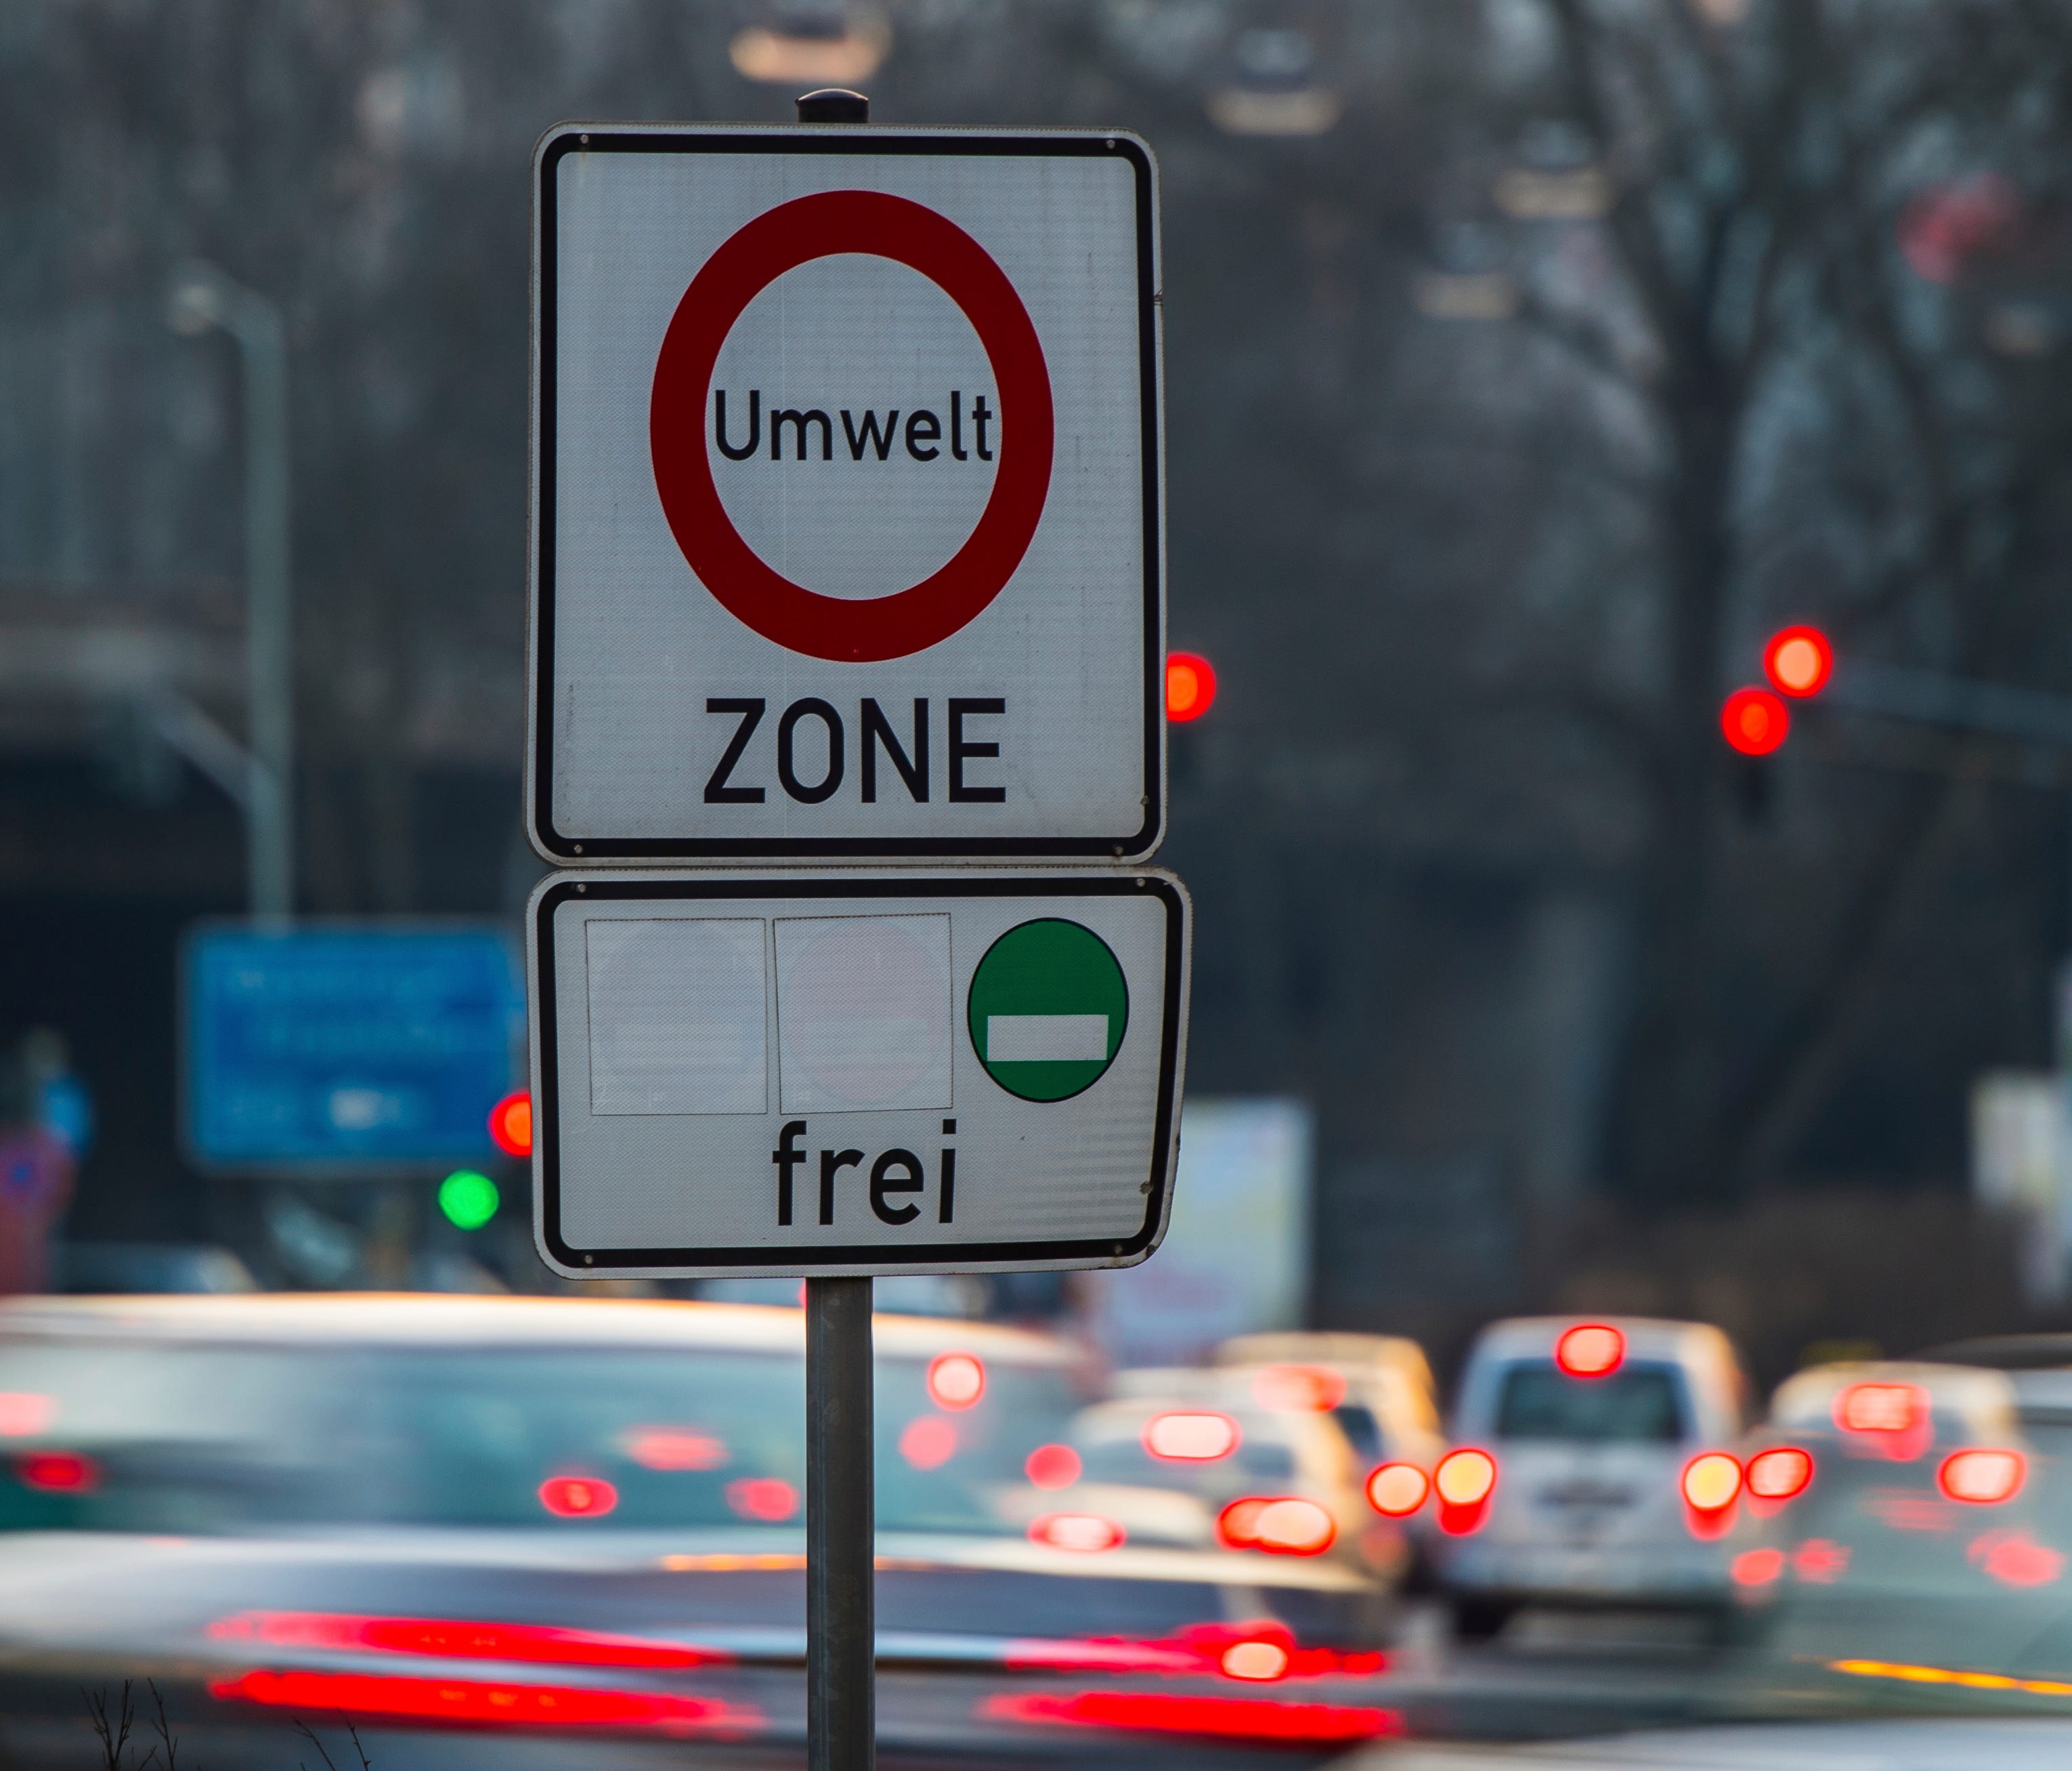 Cars pass by a sign reading 'environment zone' and allowing entrance just for cars with low emissions recognizable on a green sticker in Frankfurt, Germany, Thursday, Feb. 22, 2018.